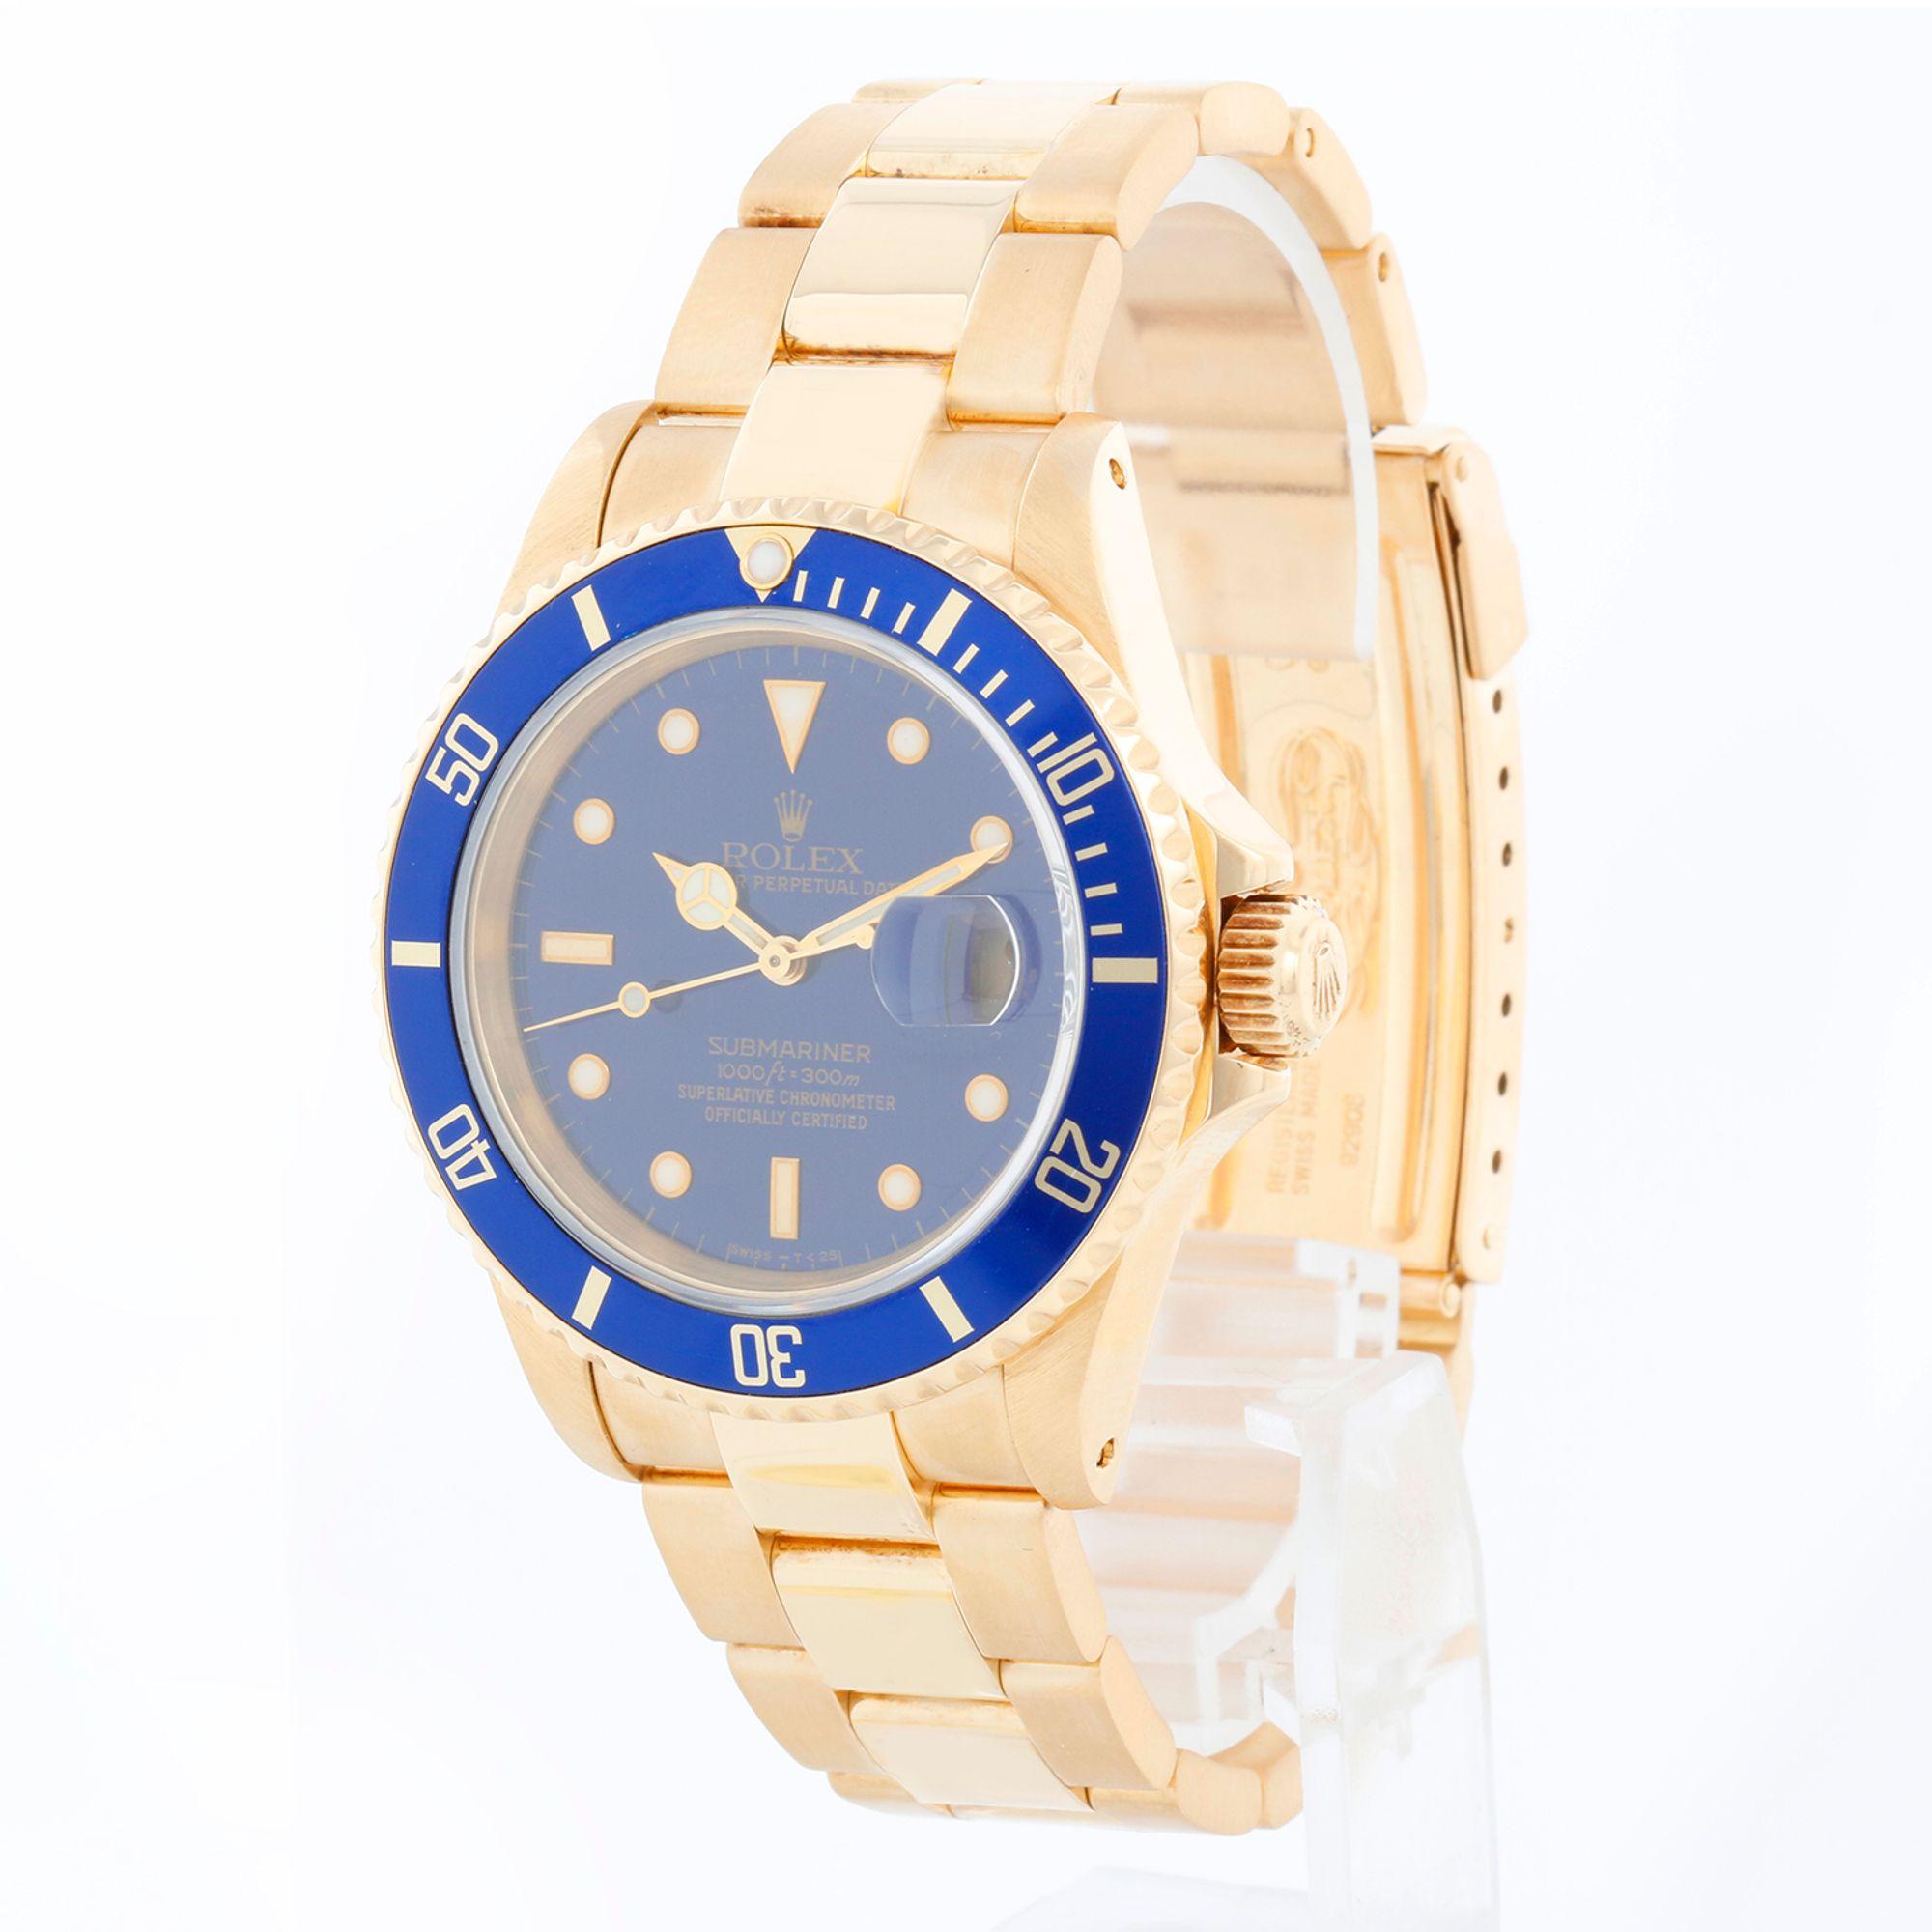 Rolex Submariner Men's 18k Gold Diver's Watch 16618 In Excellent Condition For Sale In Dallas, TX